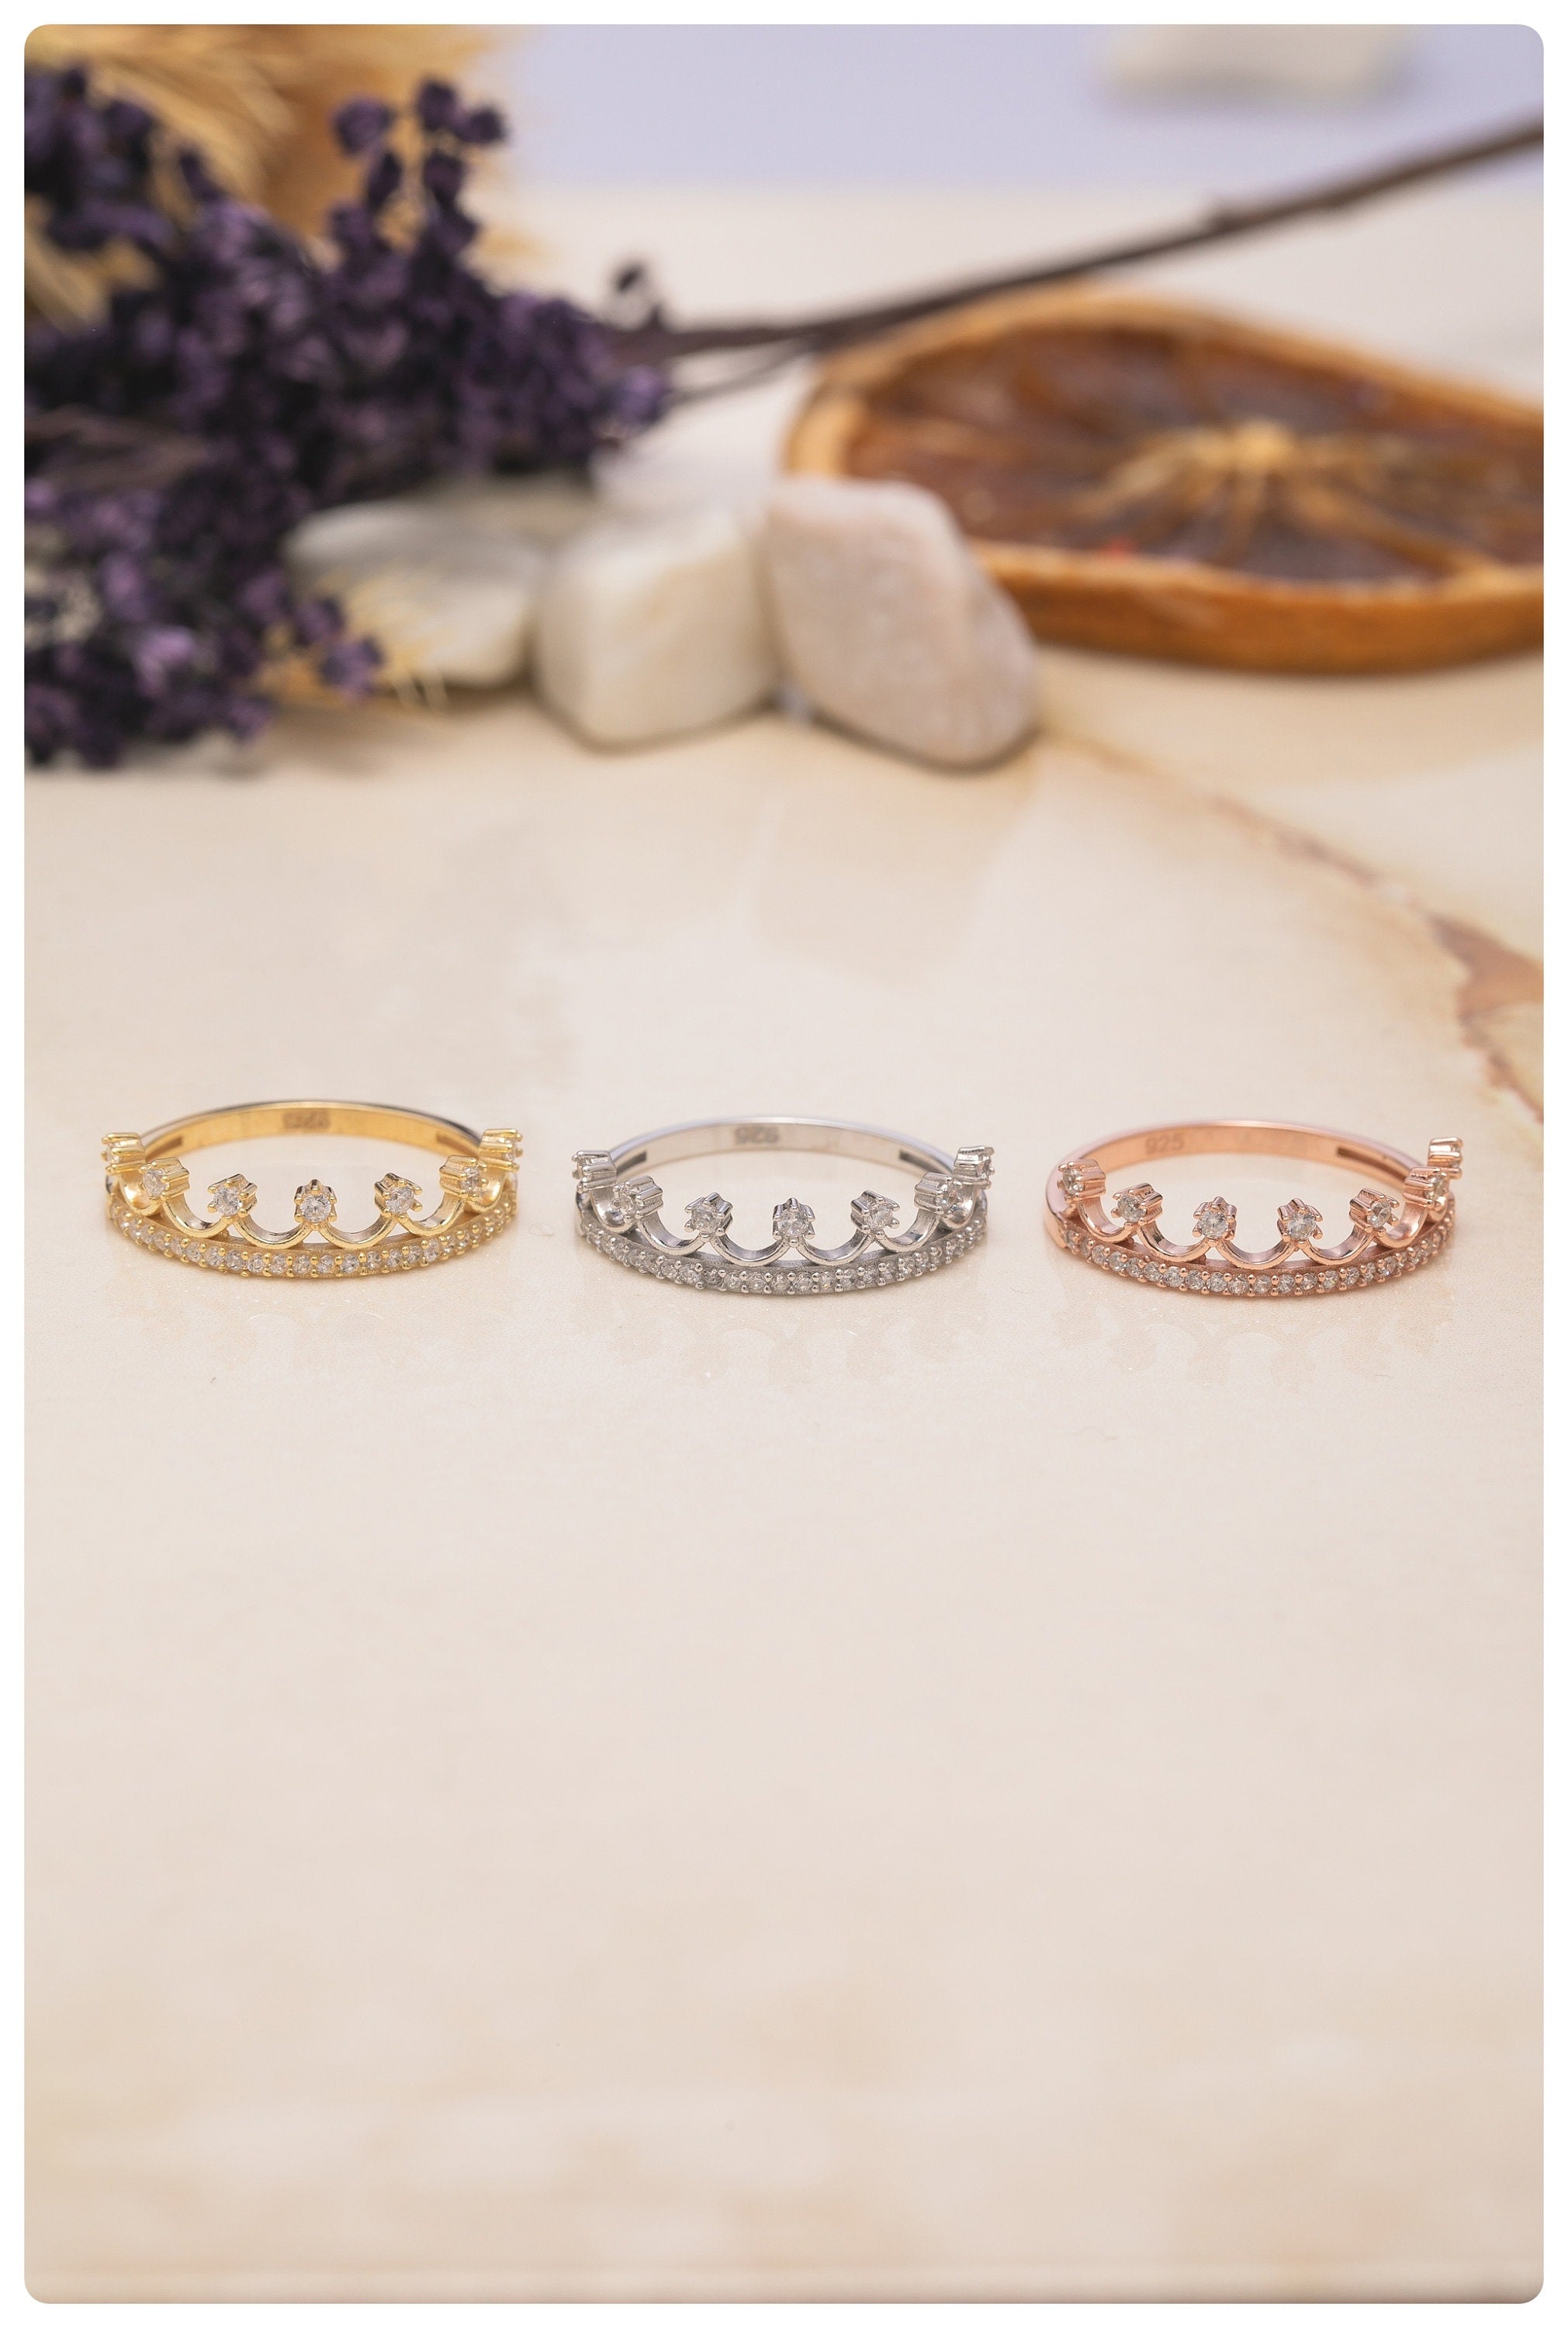 Dainty Solid 14k Gold Crown Ring, Minimalist Princess Ring, CZ Zircon Princess Ring, Tiara Ring, Gift For Mother Day, Mother Day Jewelry